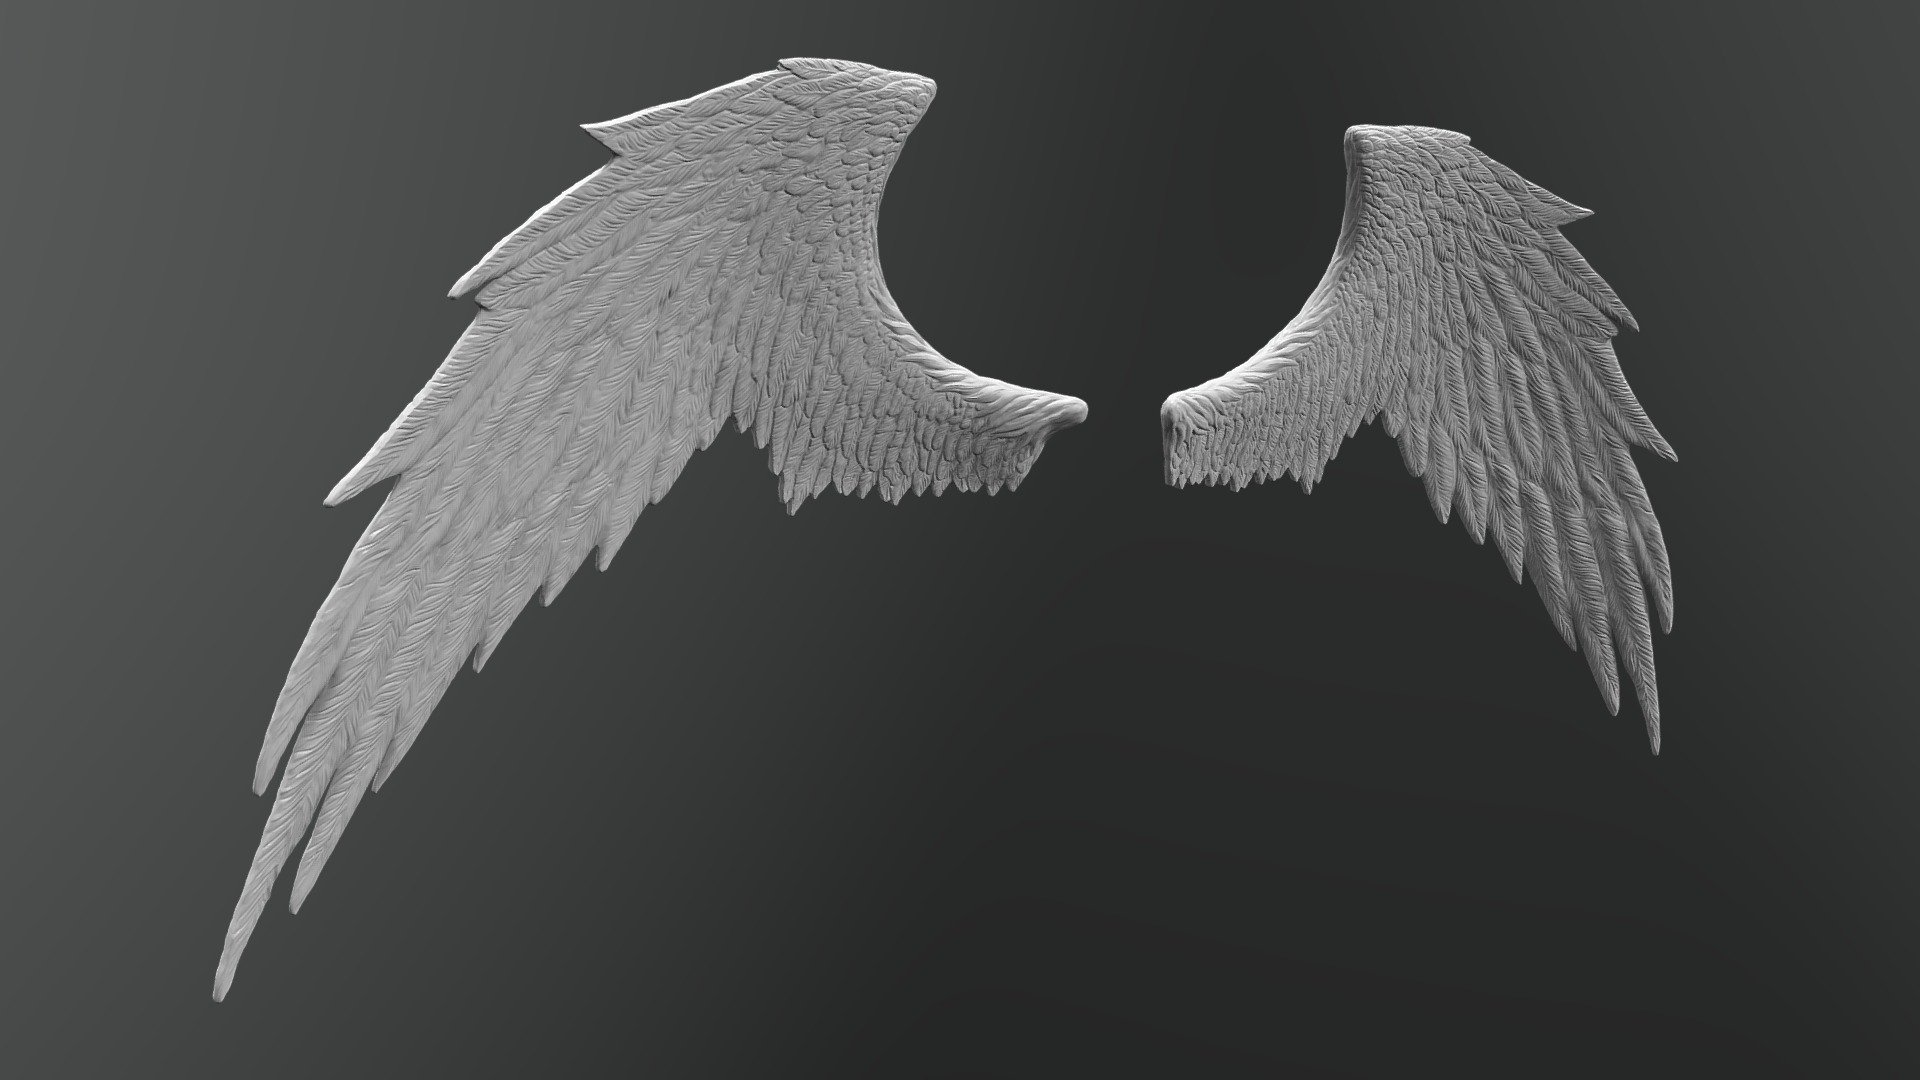 Highpoly 3d printable model of a Wings version 3;

Solid watertight topology, can be used for 3d printing;

Available file formats:

-ZTL(Zbrush 2021 or above);

-OBJ

-STL

Polygon count:

Polys: 1,099,084

Verts: 549,546

Hope you will like it!

Check out my profile to see the other cool models!
 - 3d Printable Wings 3 - Buy Royalty Free 3D model by Rumpelstiltskin (@rumpelshtiltshin) 3d model